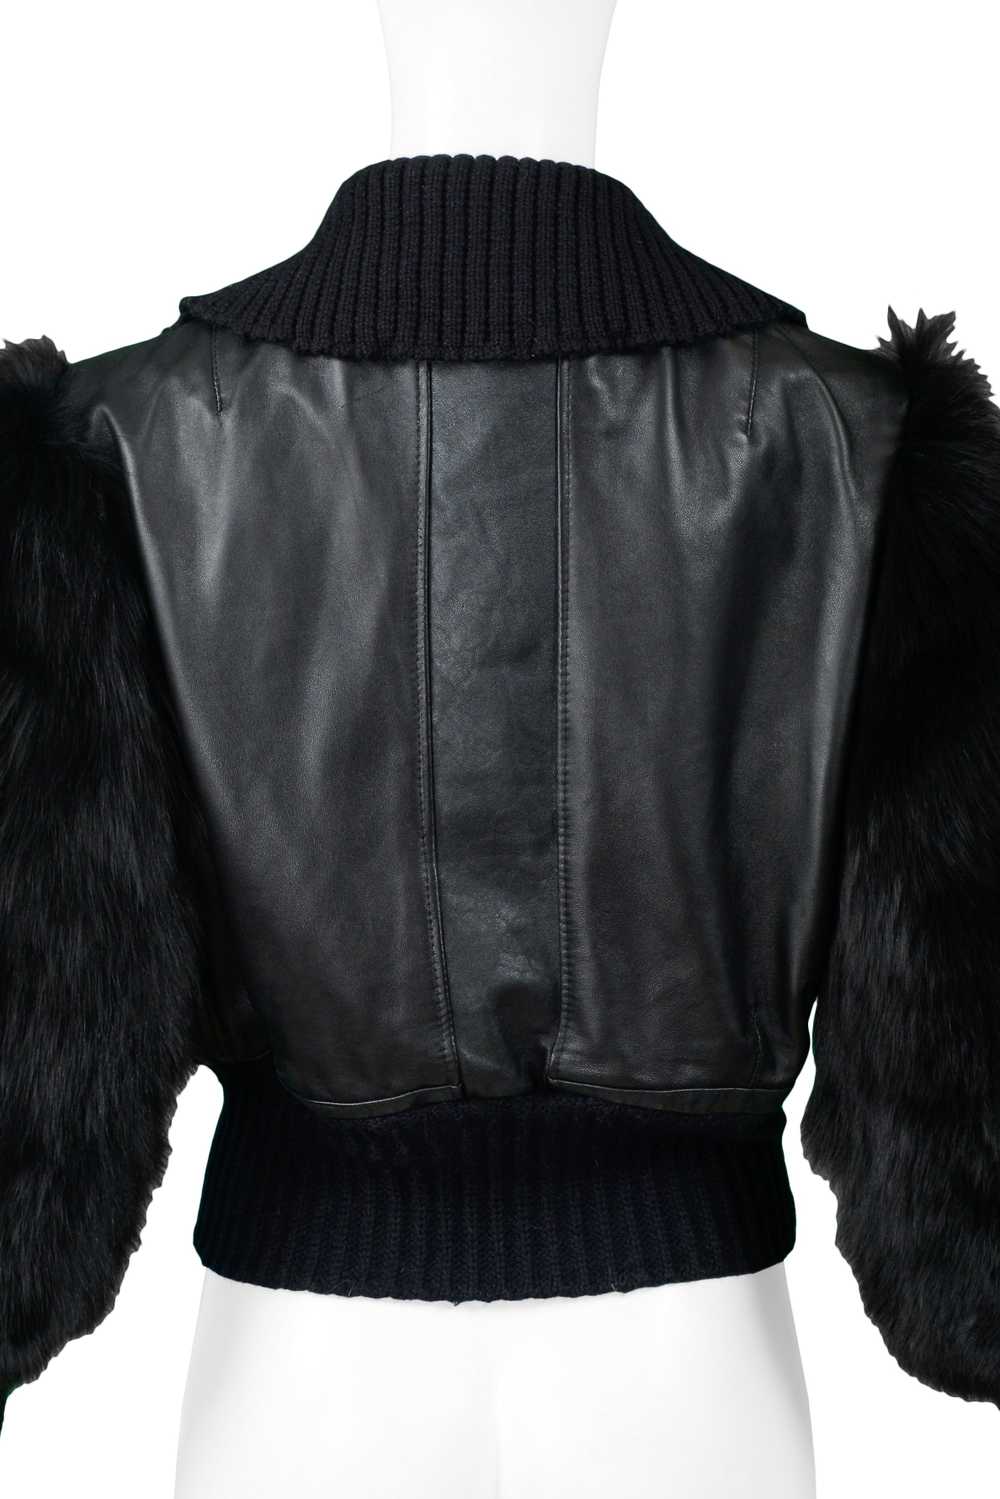 GUCCI BY TOM FORD LEATHER & FOX FUR JACKET 2003 - image 3